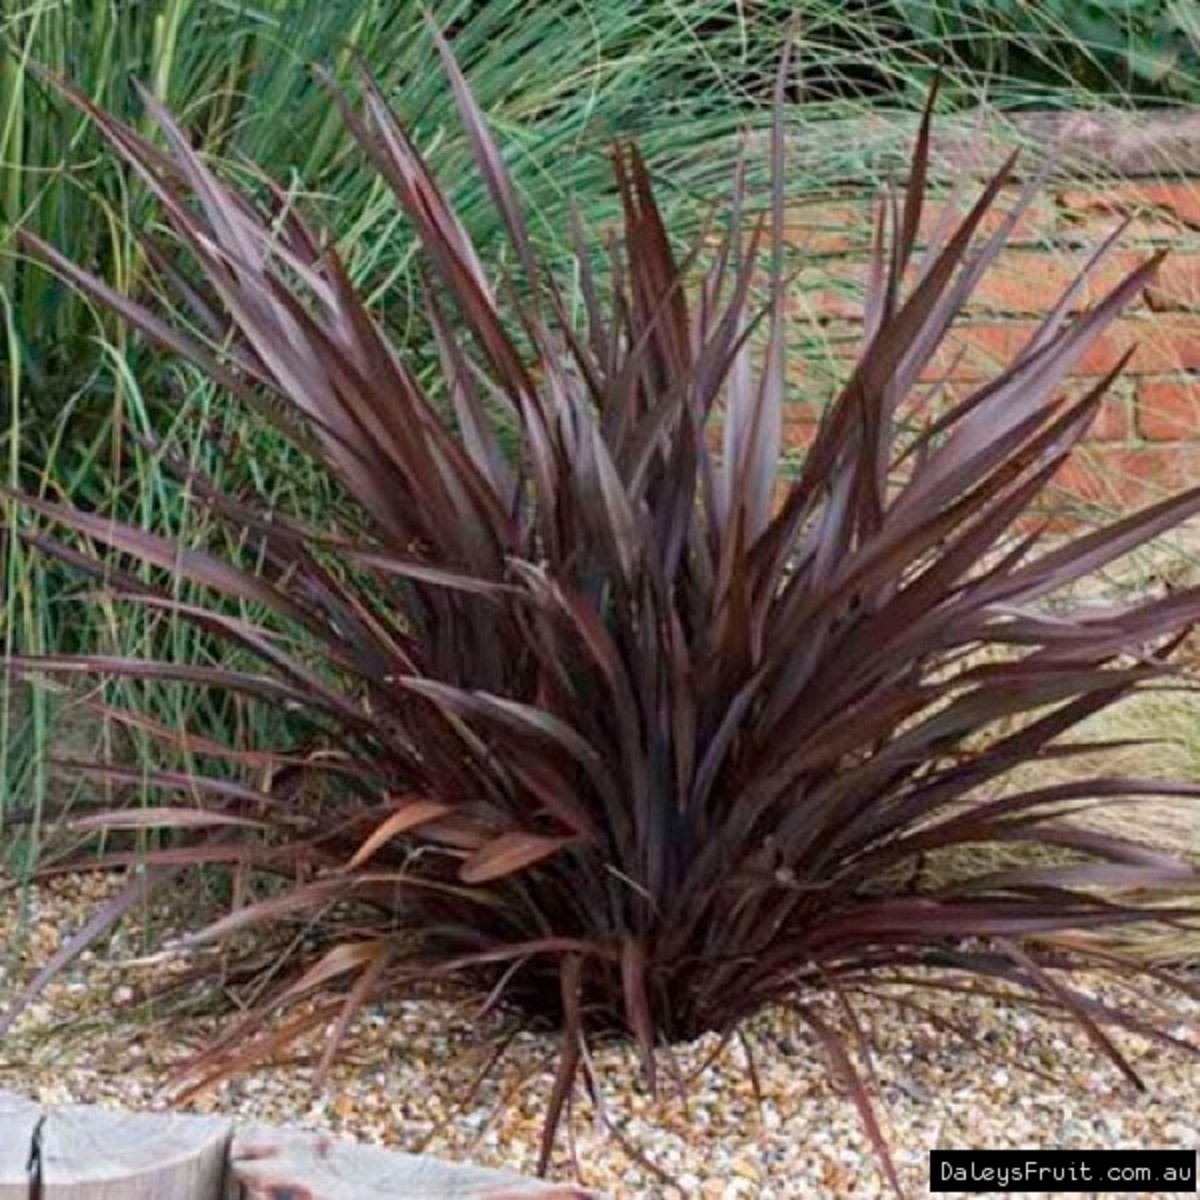 A suitable spot for a New Zealand flax will allow plenty of room for its long blades and full feathery shape.